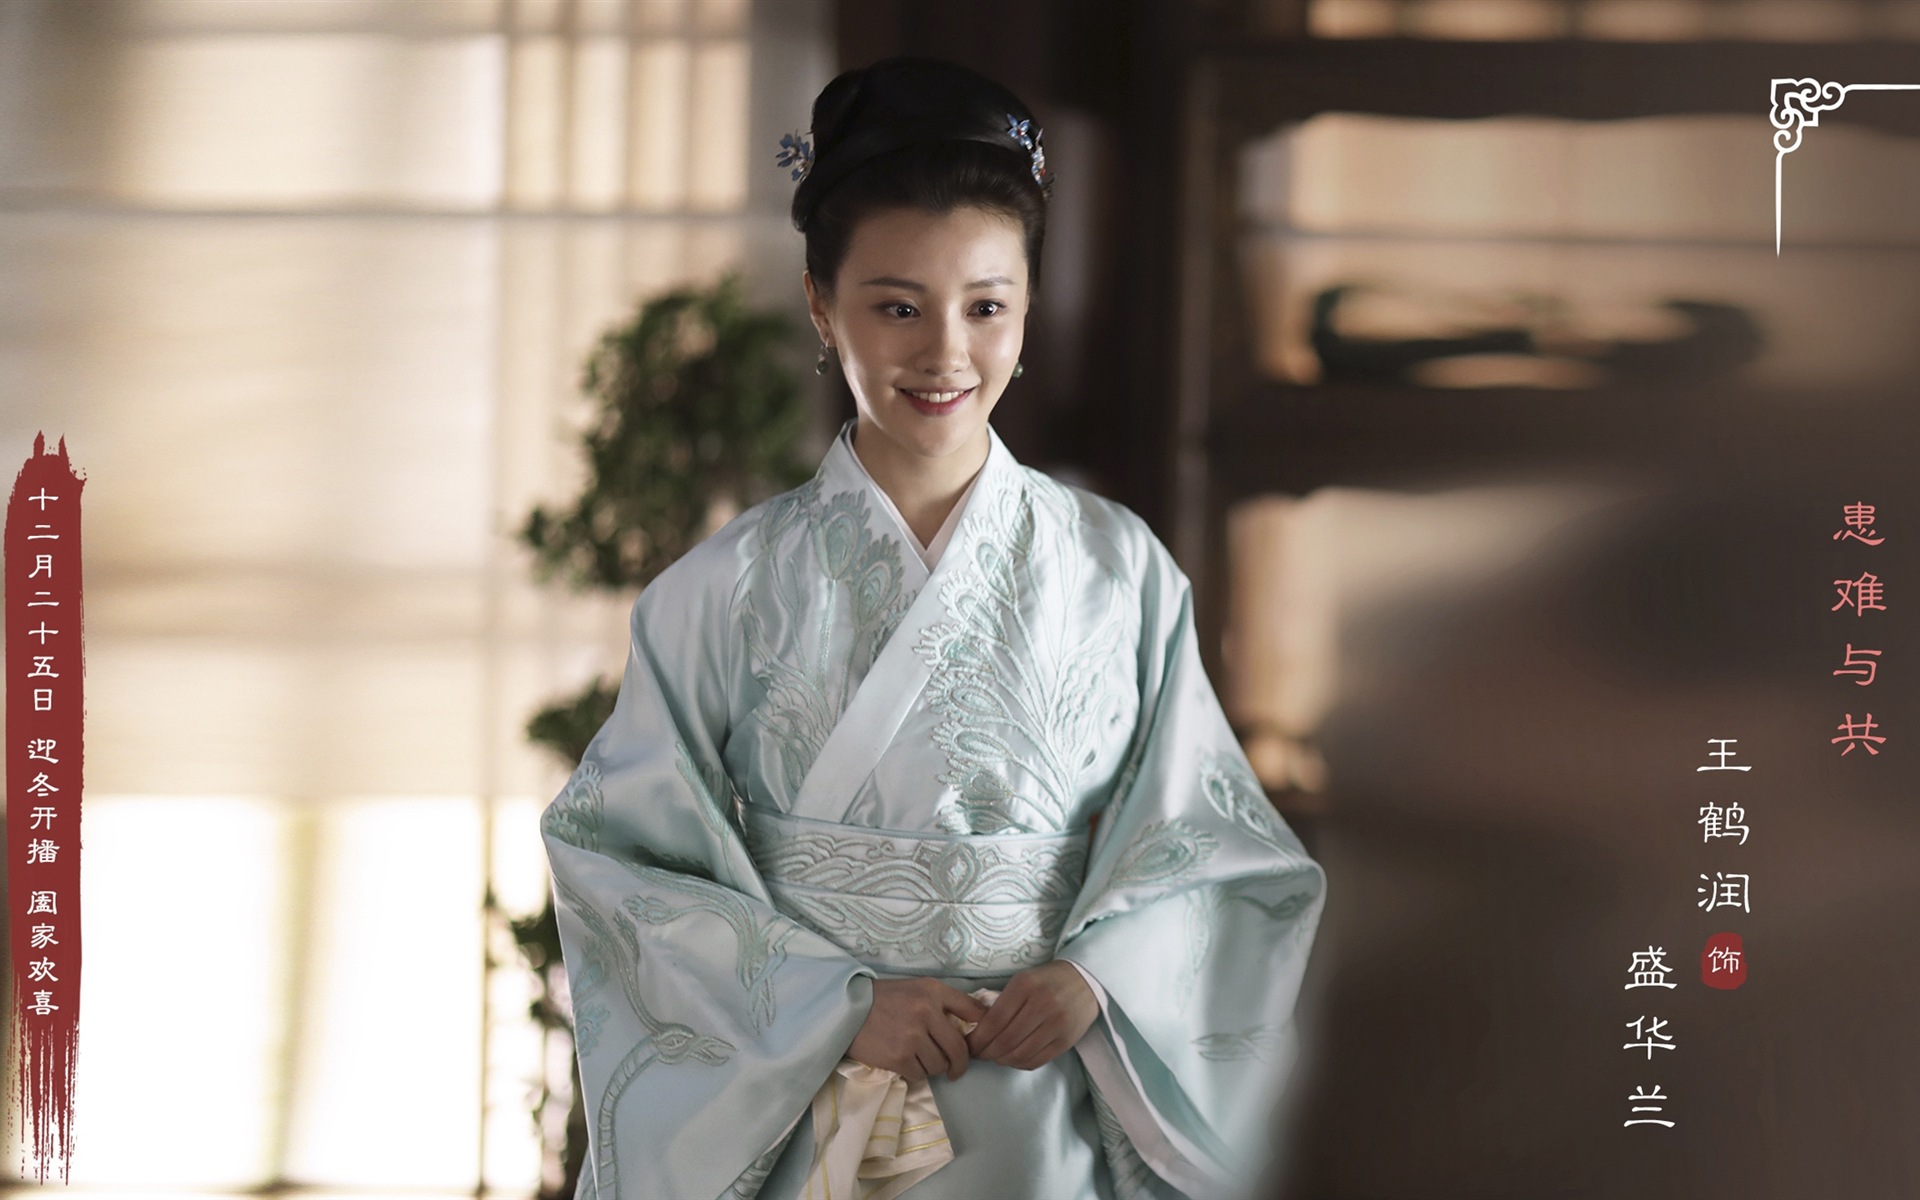 The Story Of MingLan, TV series HD wallpapers #31 - 1920x1200